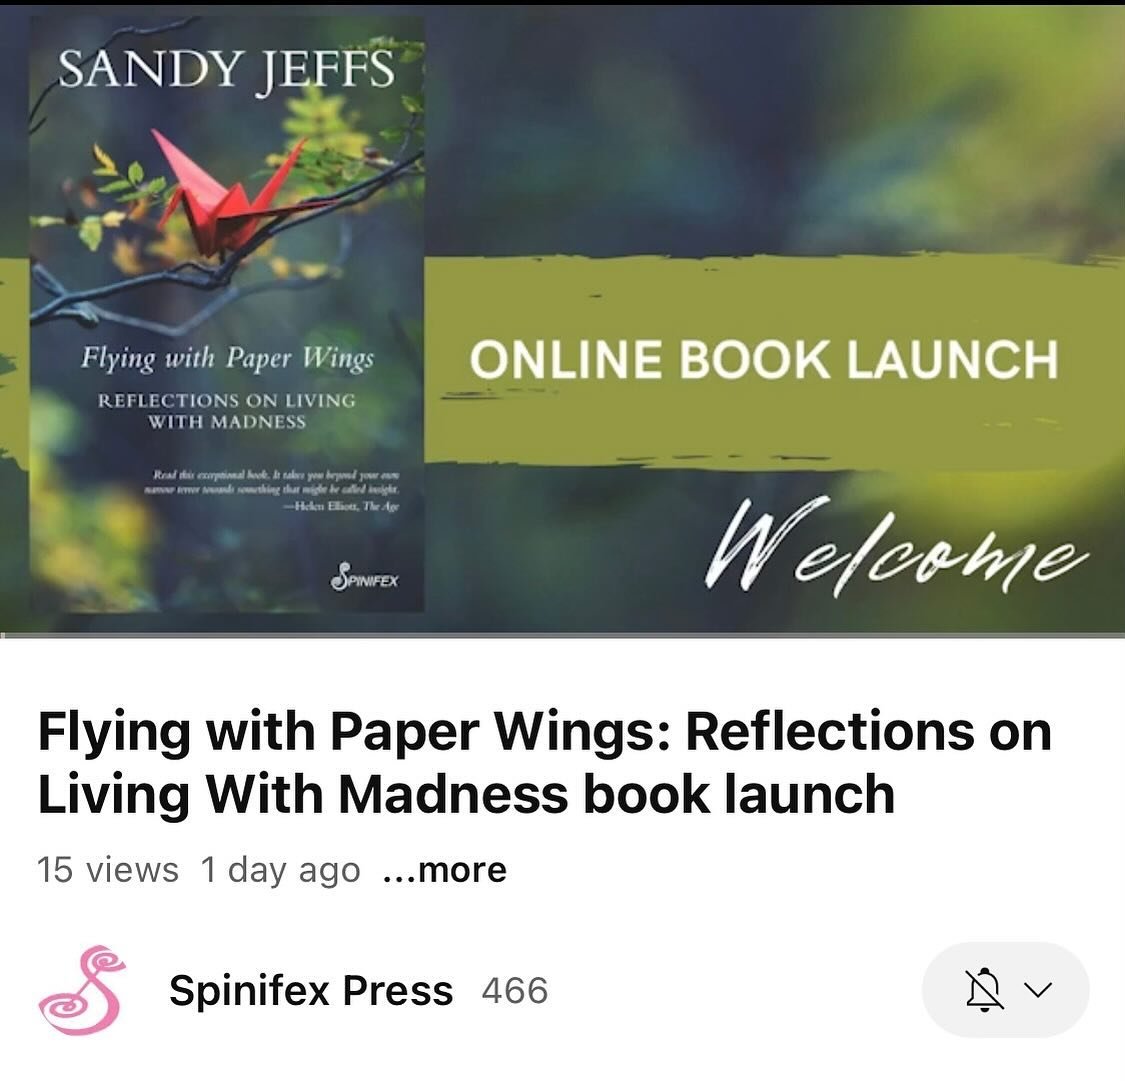 Catch up on the Online Book Launch for the updated version of Flying With Paper Wings by Sandy Jeffs - video now on our YouTube channel (link in bio).

You can order your copy of Flying with Paper Wings: Reflections on Living with Madness on our webs